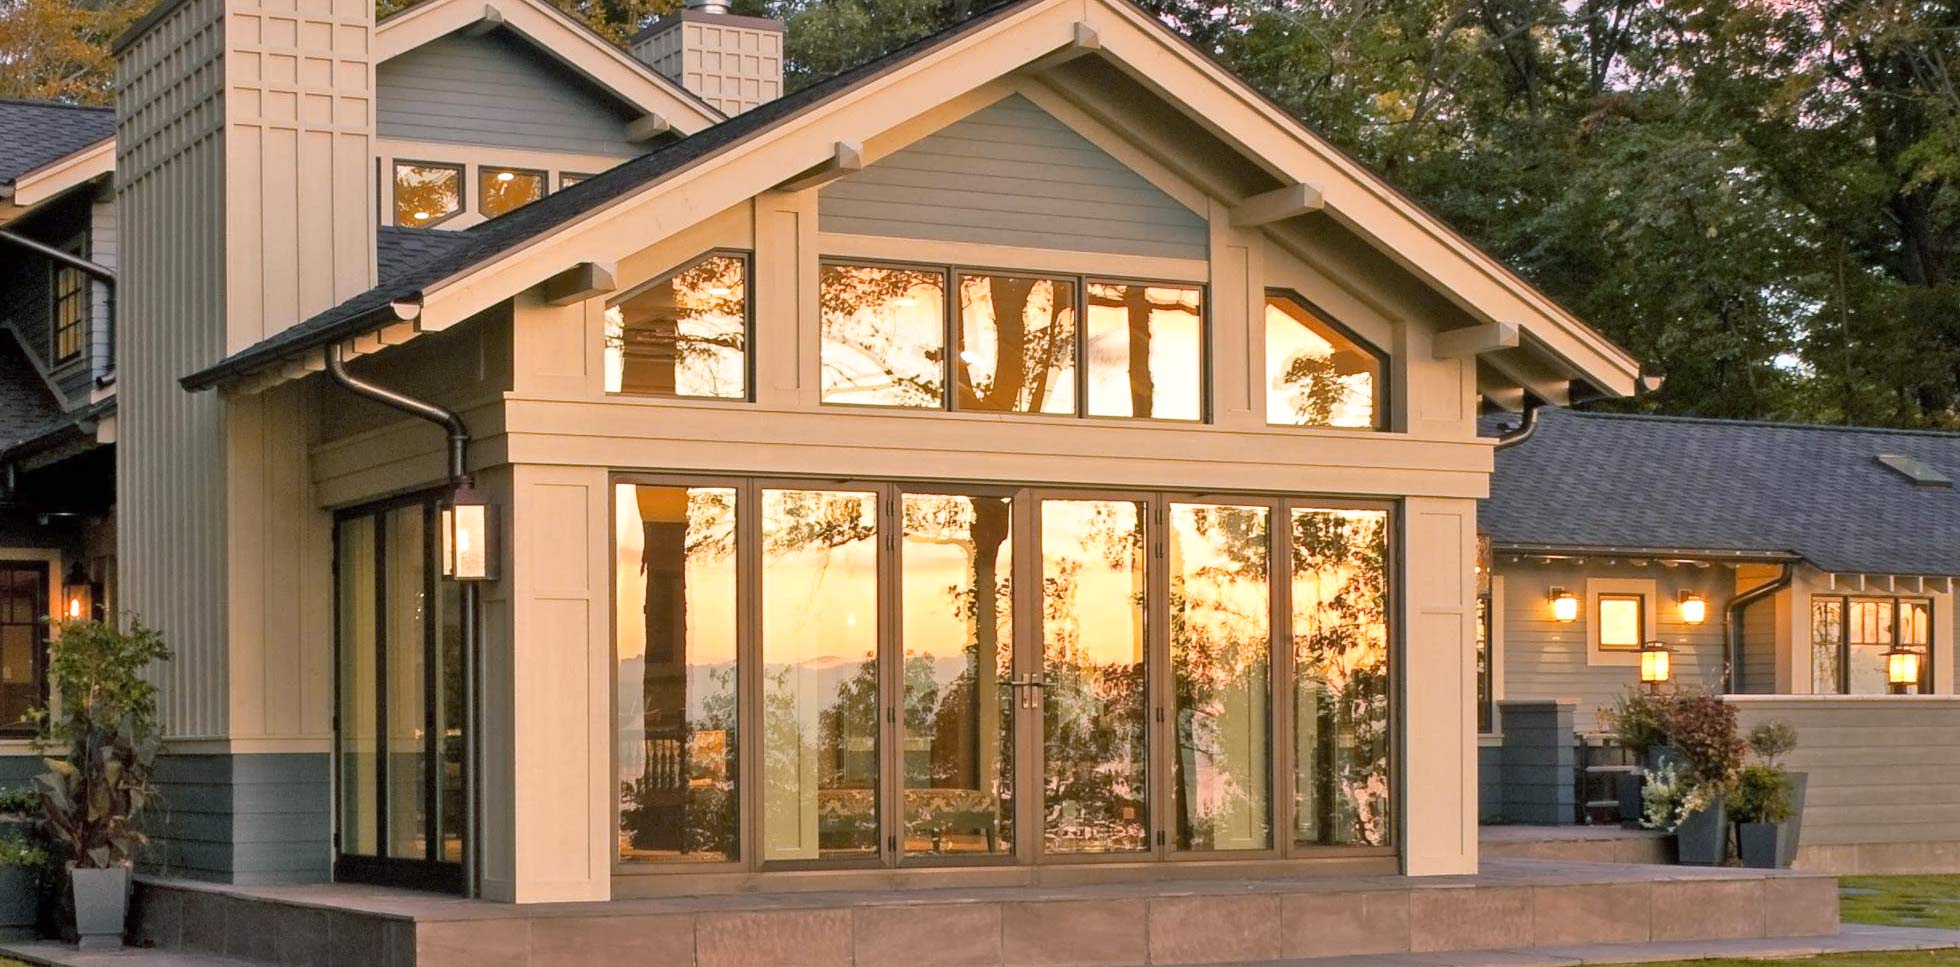 Residential Insulated Thermal Window Glass in Maple Shade, NJ 08052